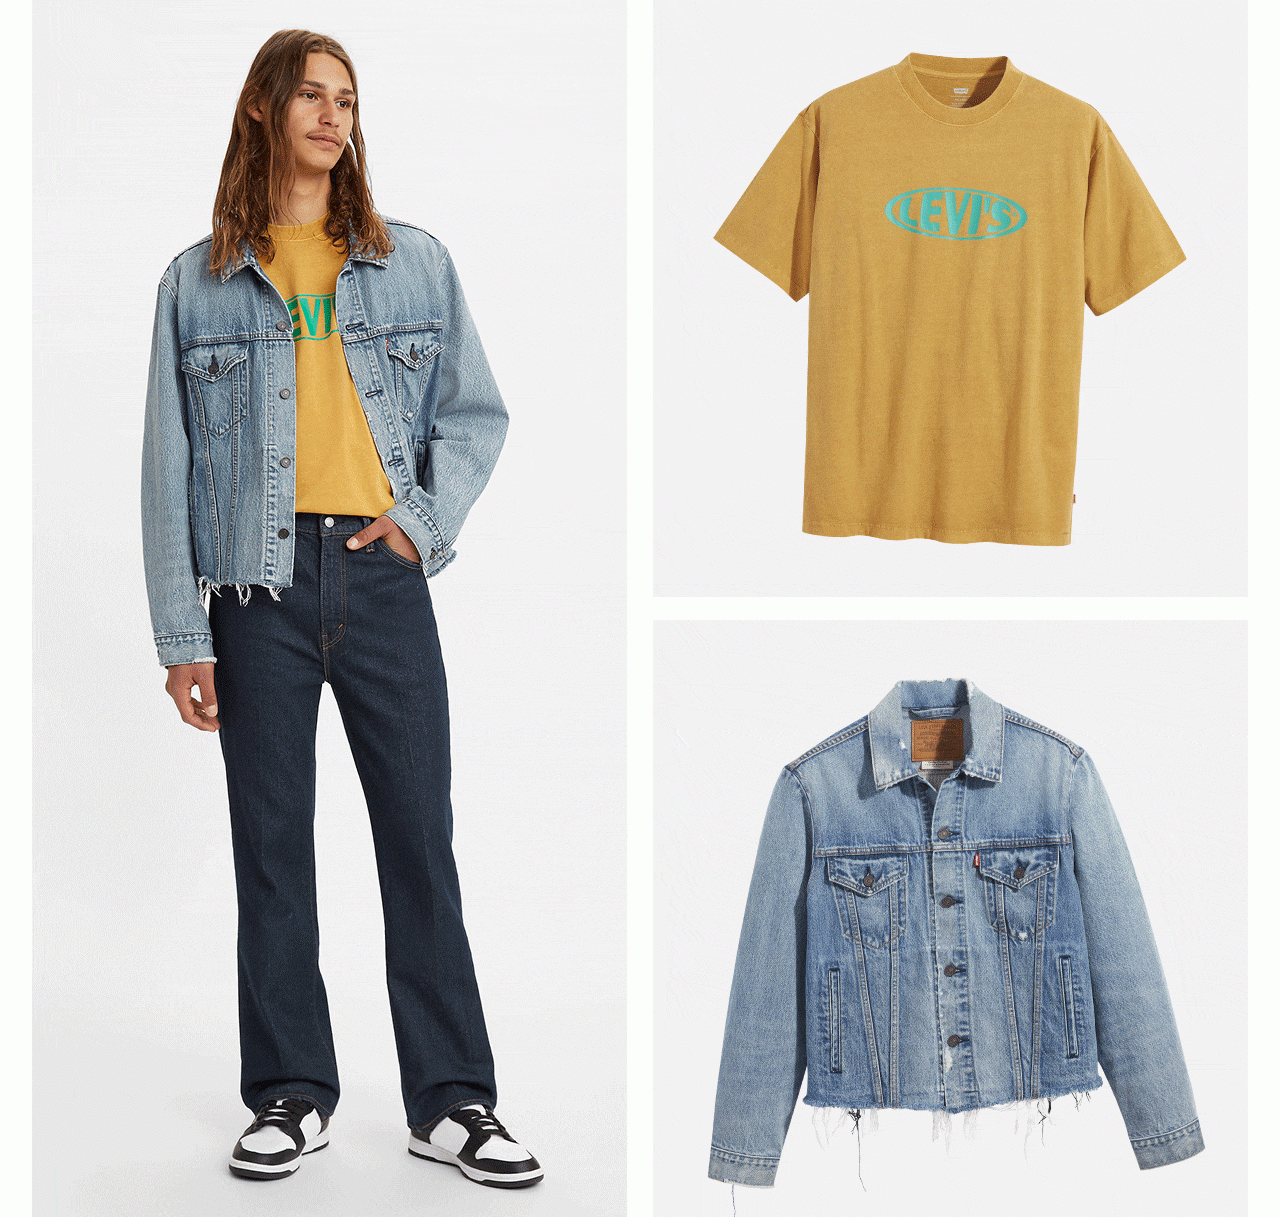 BUILD THE LOOK: SHOP TOPS & OUTERWEAR